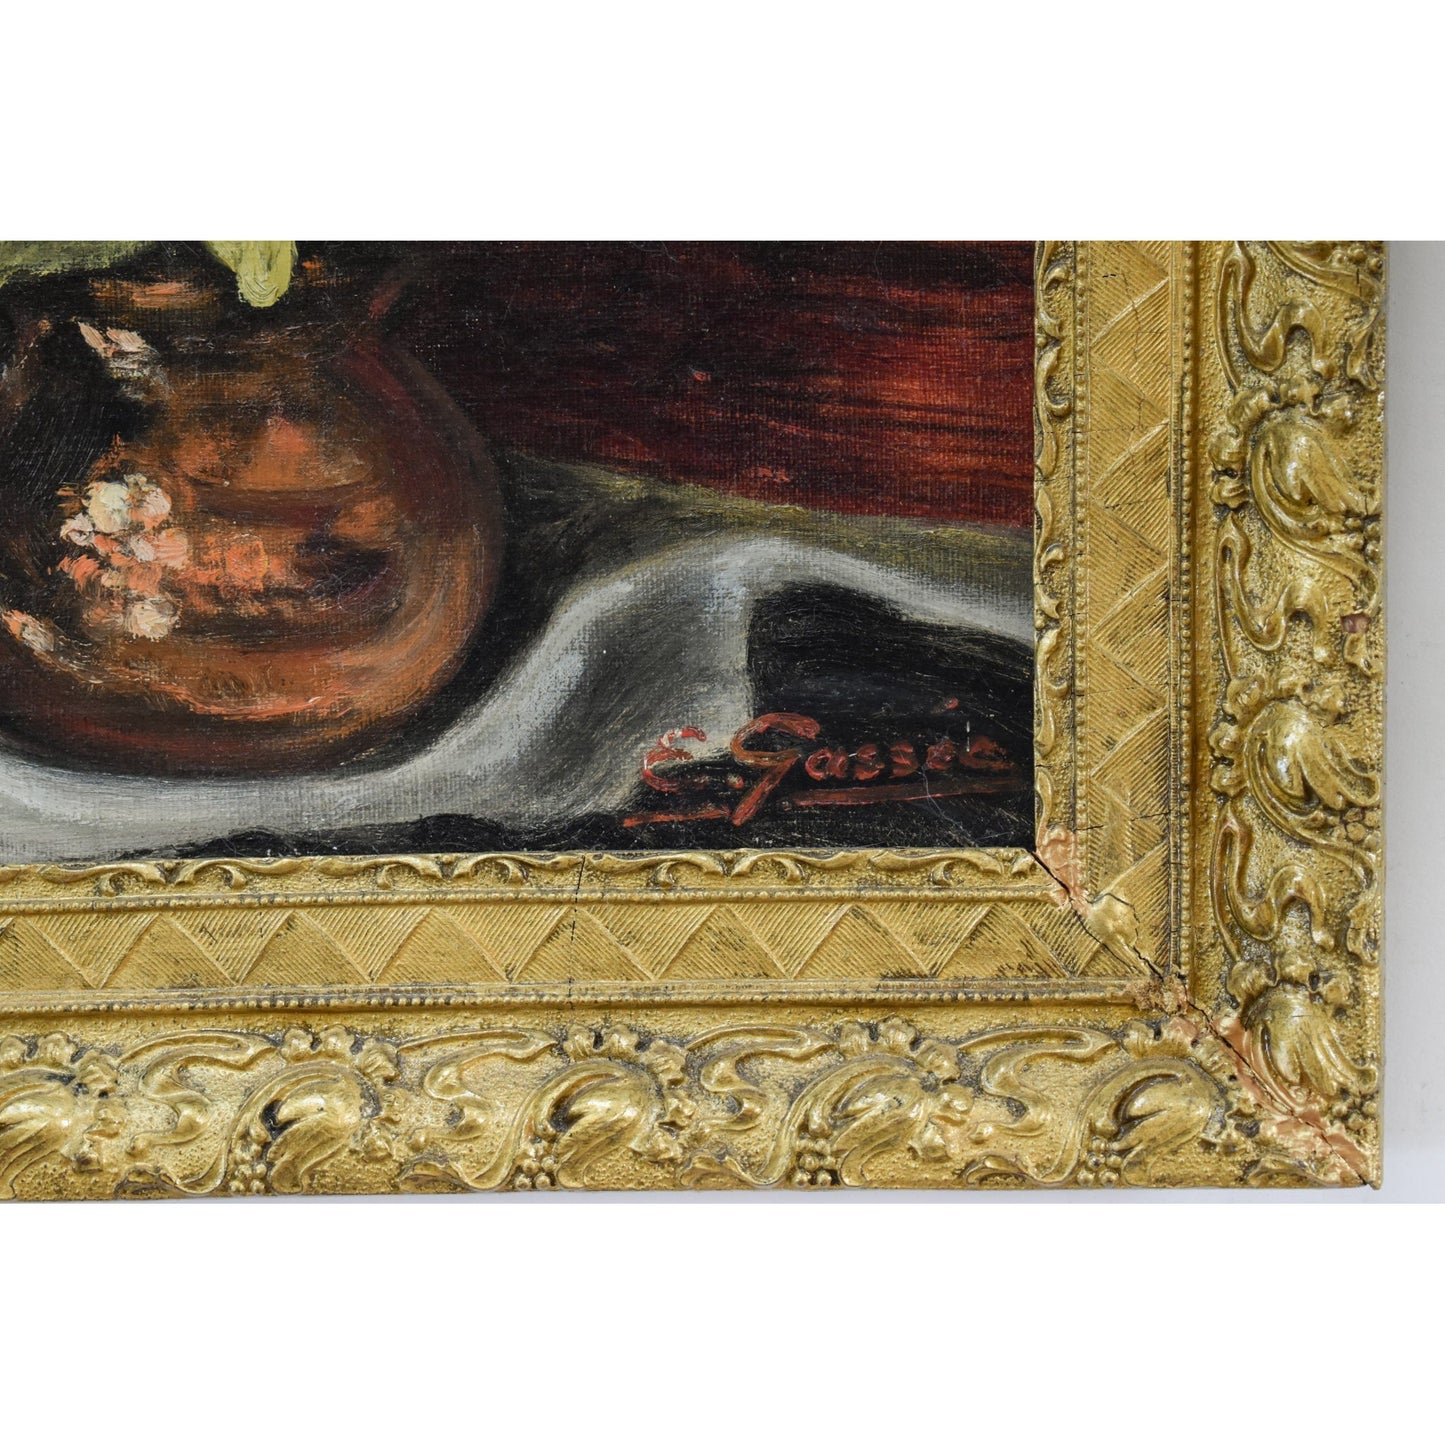 Vintage still life oil painting, flowers vase and evil mask circa 1950, signed Gassée, for sale at Winckelmann Gallery